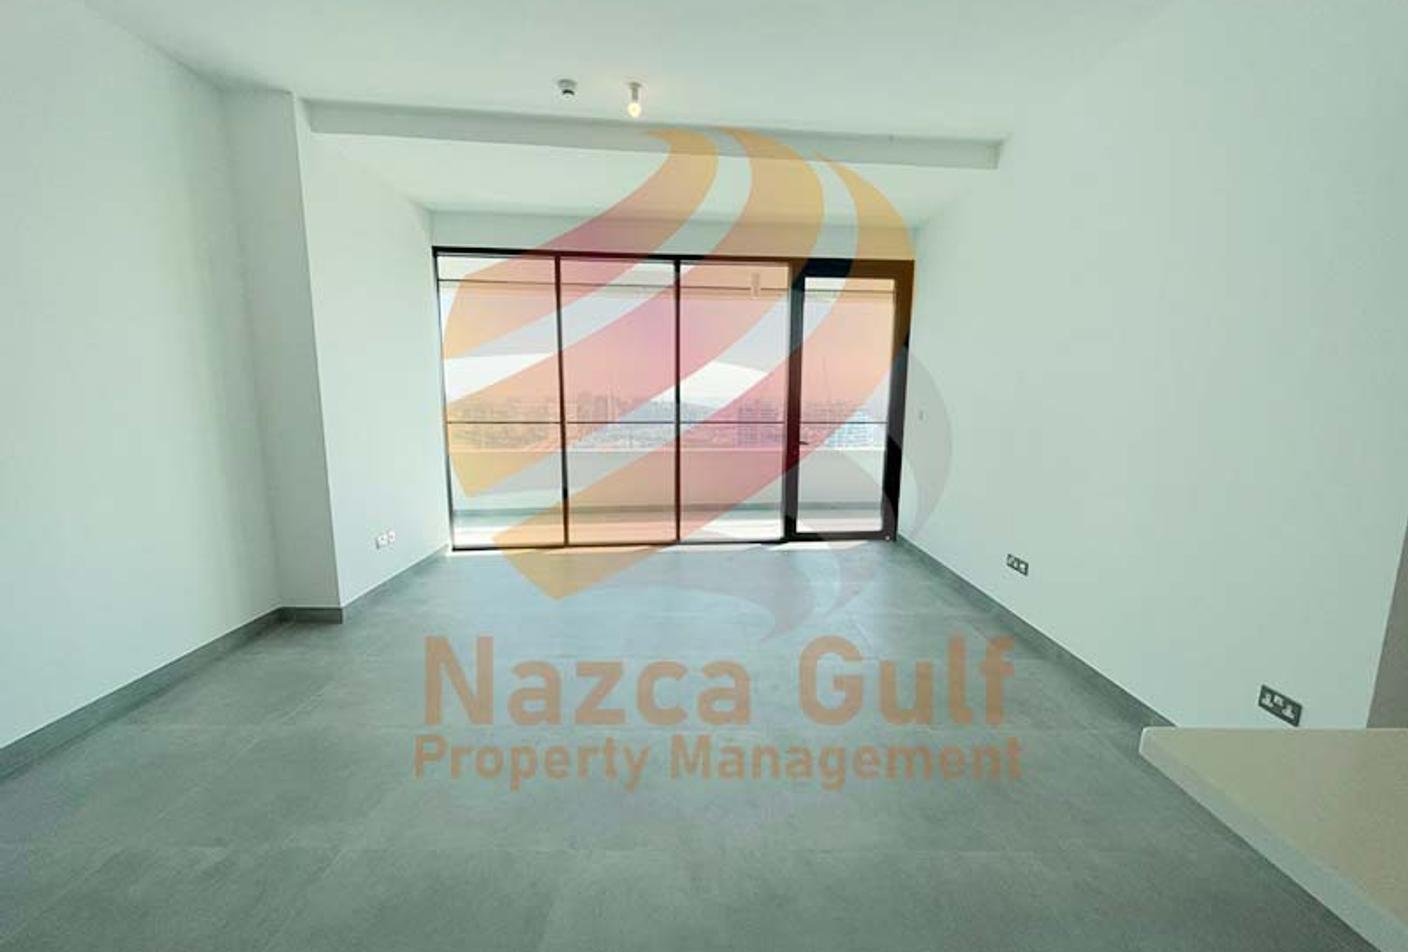 3 bed, 4 bath Hotel & Hotel Apartment for rent in Al Raha Beach Hotel, Al Raha Beach, Abu Dhabi for price AED 185000 yearly 